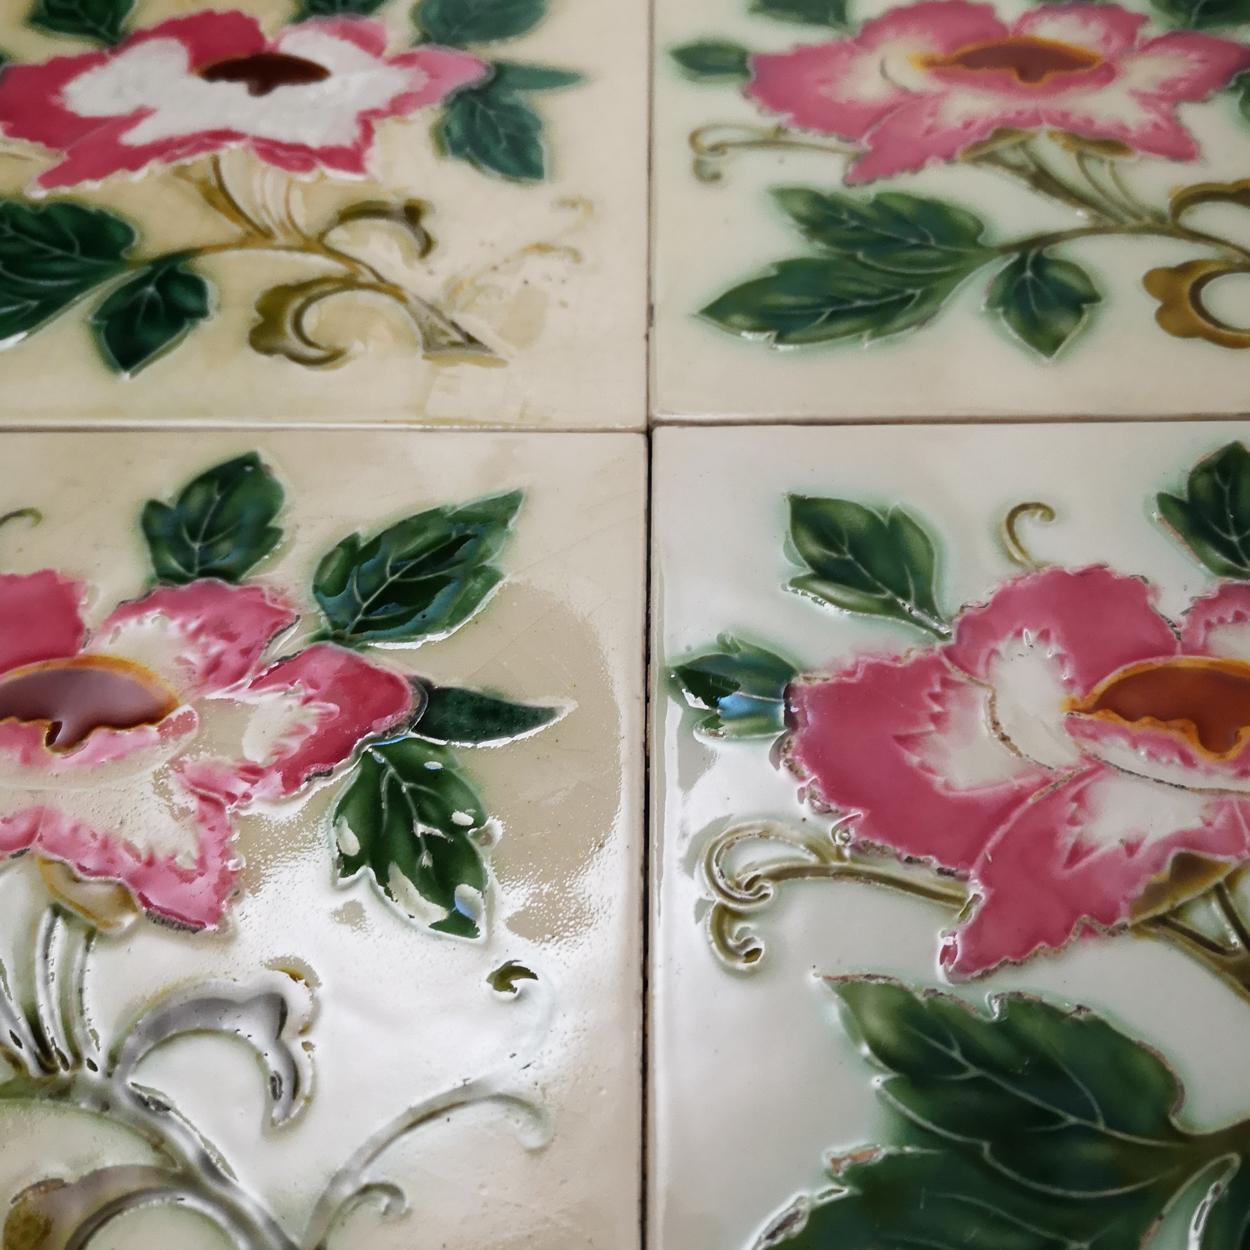 This is an amazing set of antique Art Nouveau handmade tiles with an image of pink rose in relief on a soft yellow background. These tiles would be charming displayed on easels, framed or incorporated into a custom tile design.

Please note that